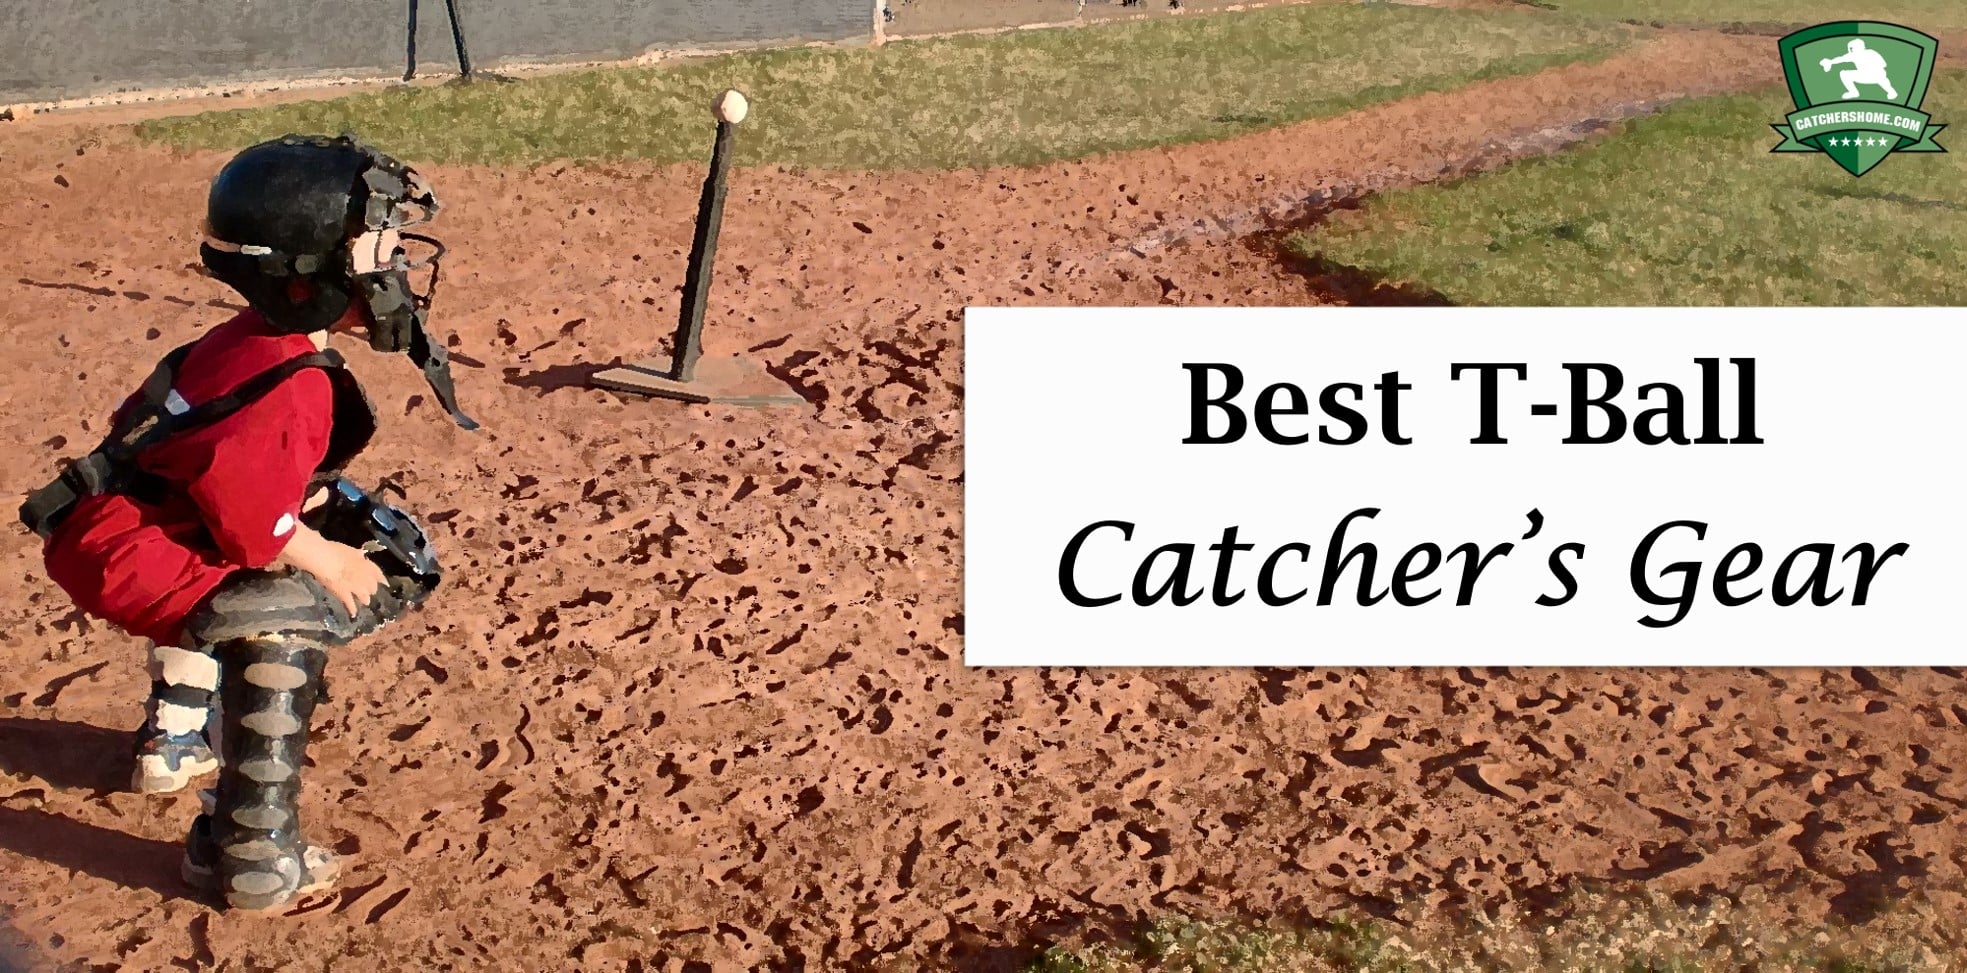 Title photo for post on best t-ball catchers gear for little Baseball and Softball catchers